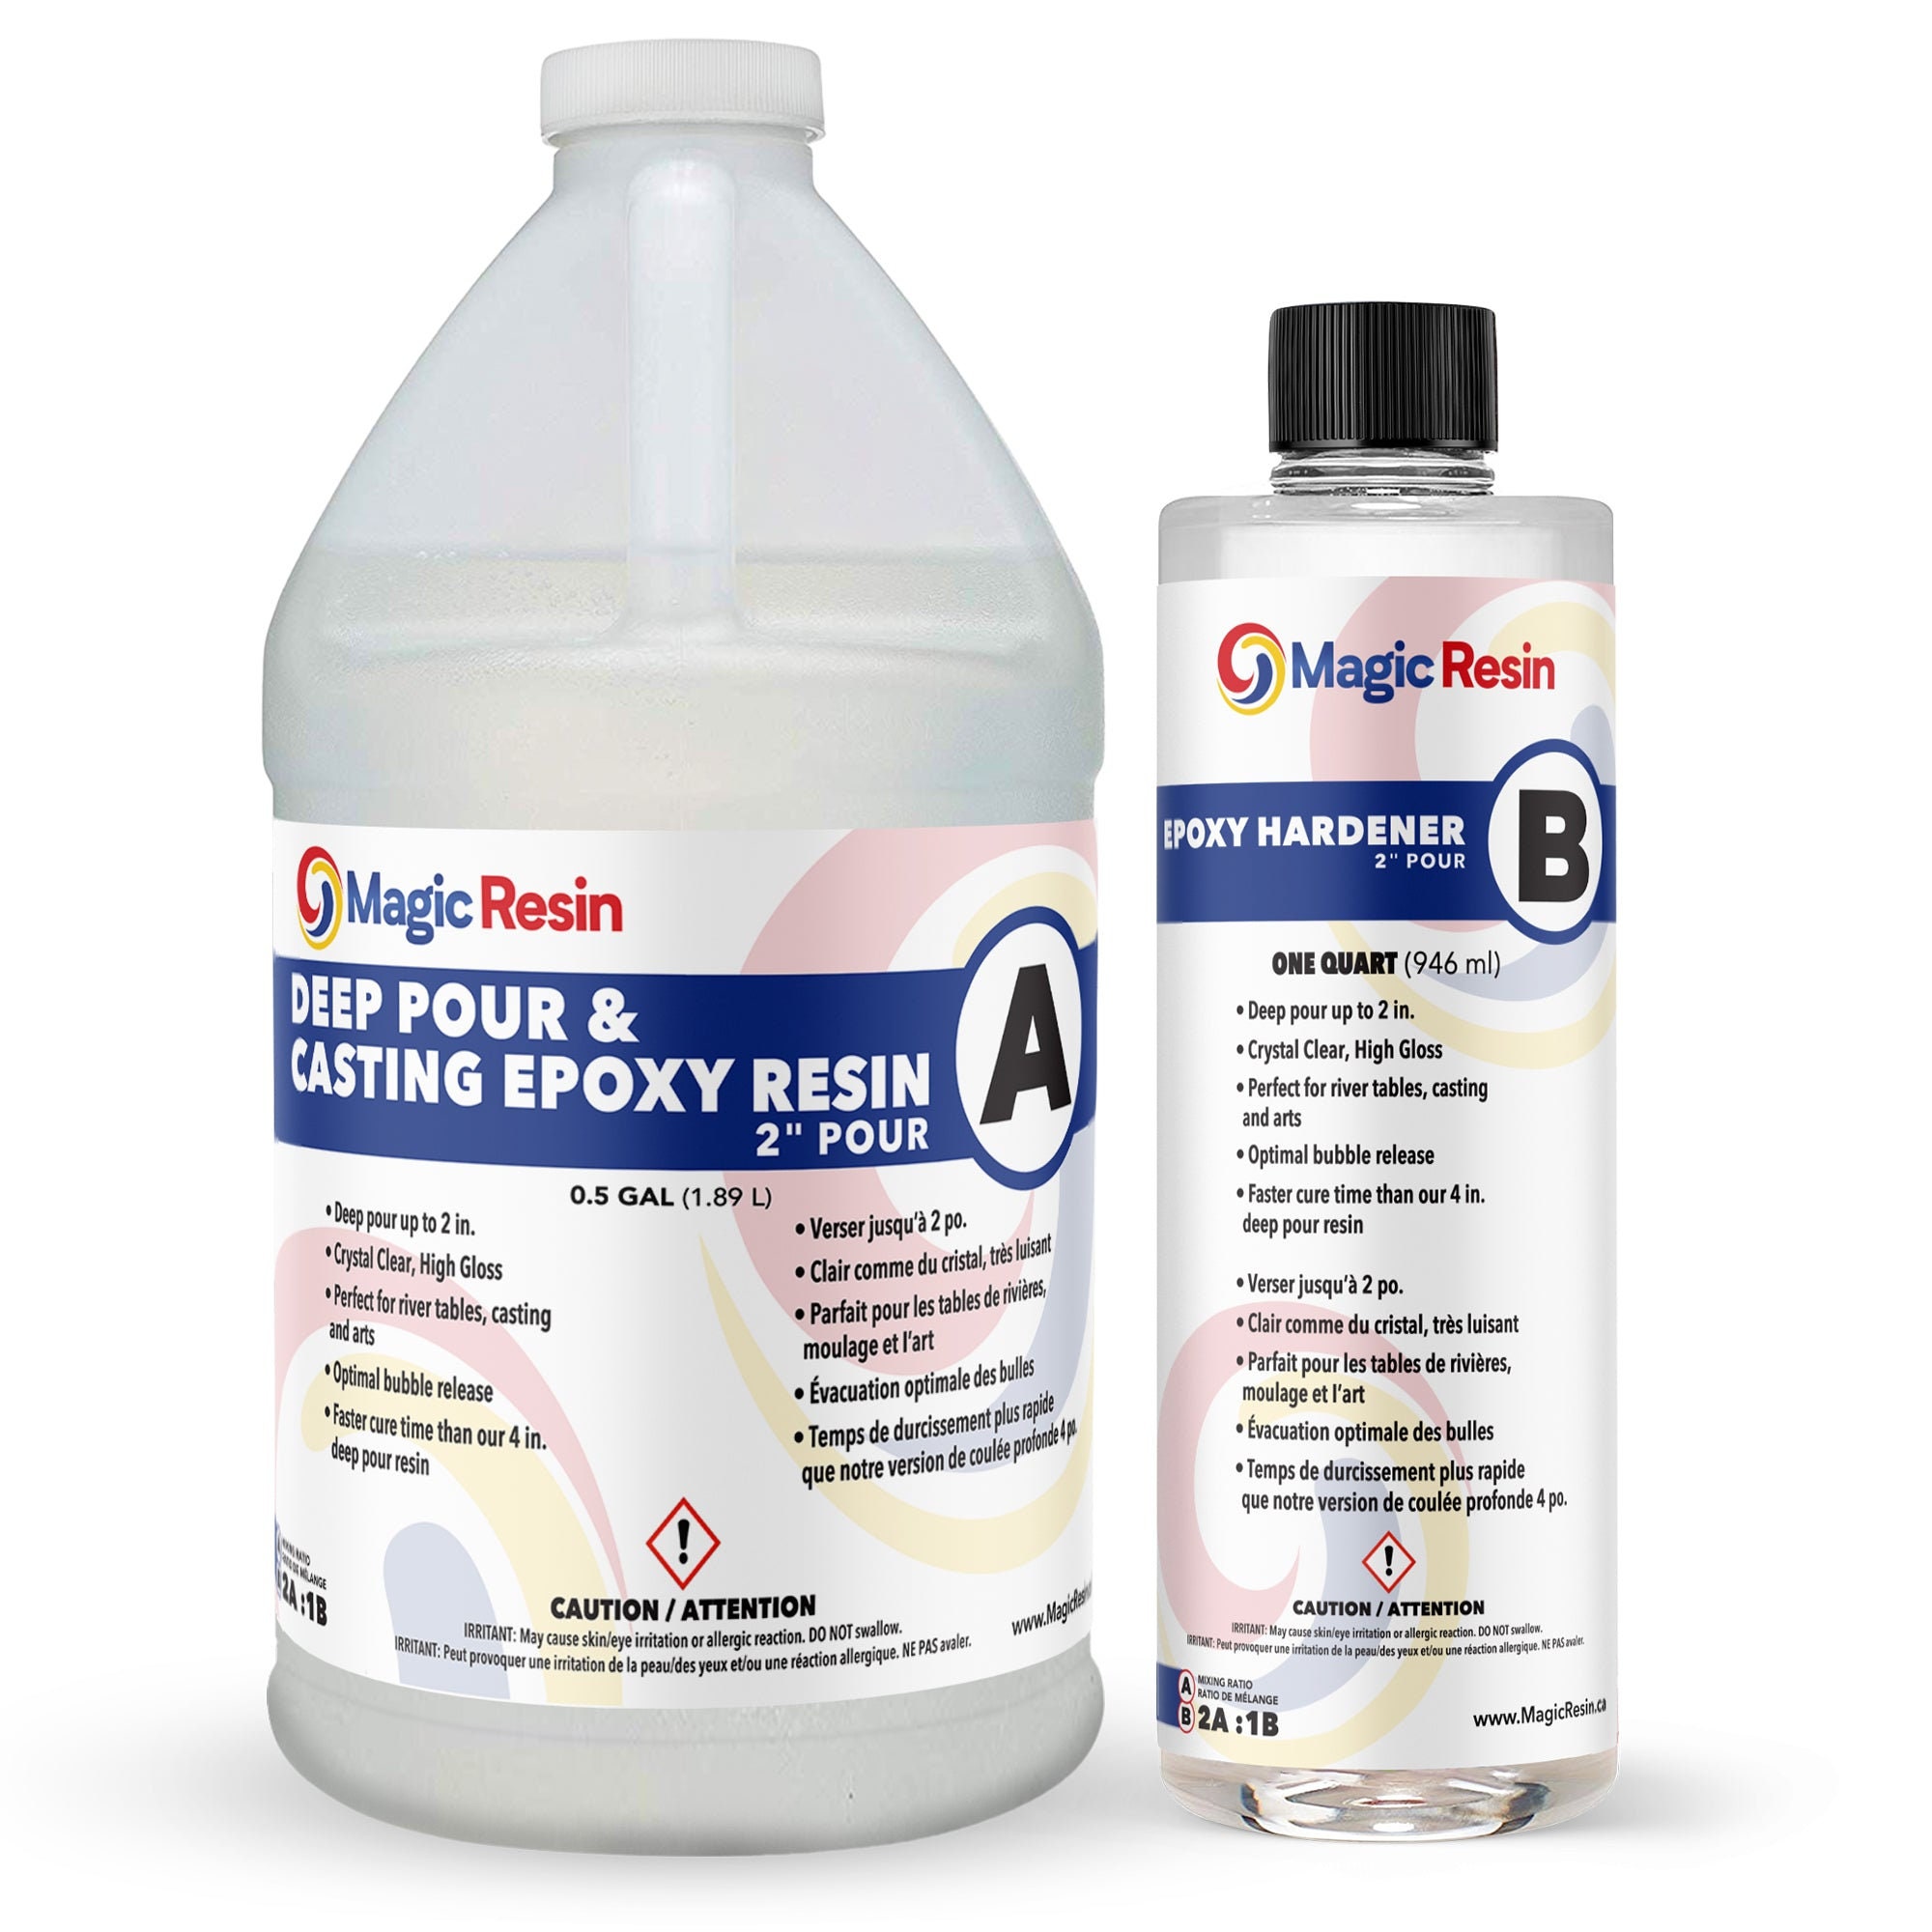 Floral Epoxy Resin for Large Art Castings, Deep Pours and Simulated Water -  2 Part Kit 1.5 Gallon